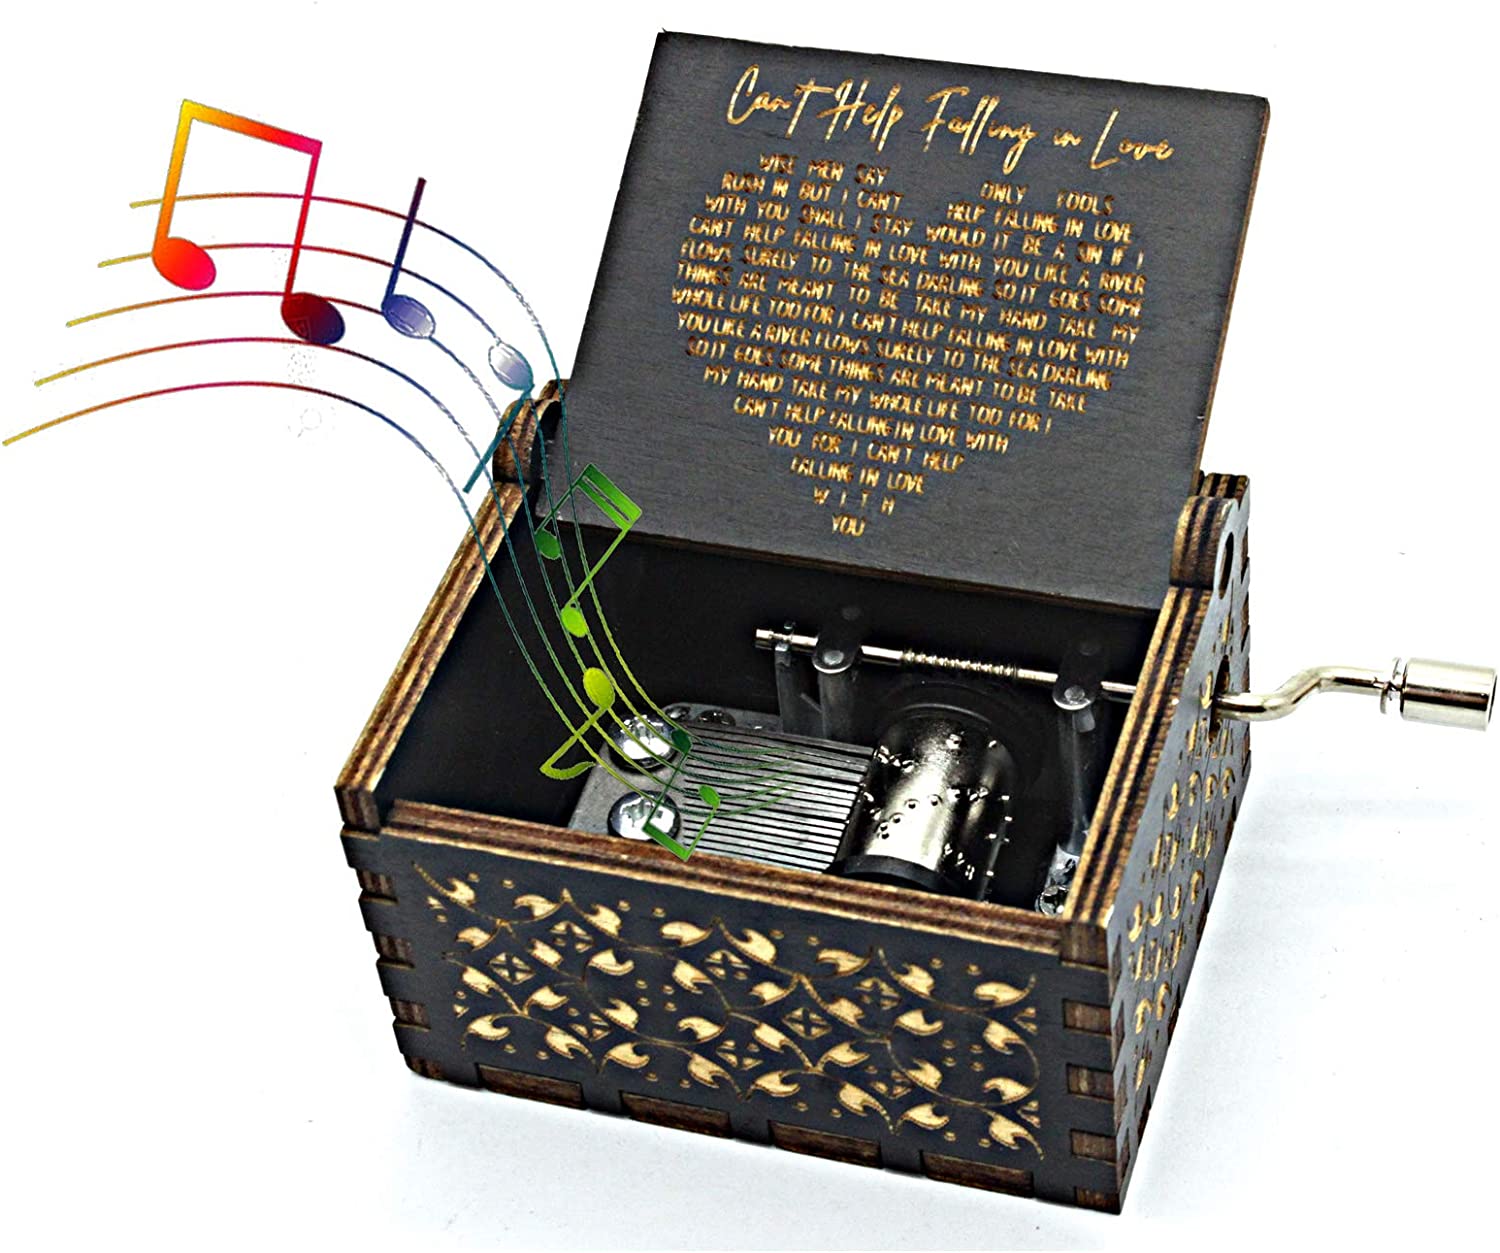 Colorful music notes are flowing out of a wooden music box which also has a crank handle on the side to wind up the box.